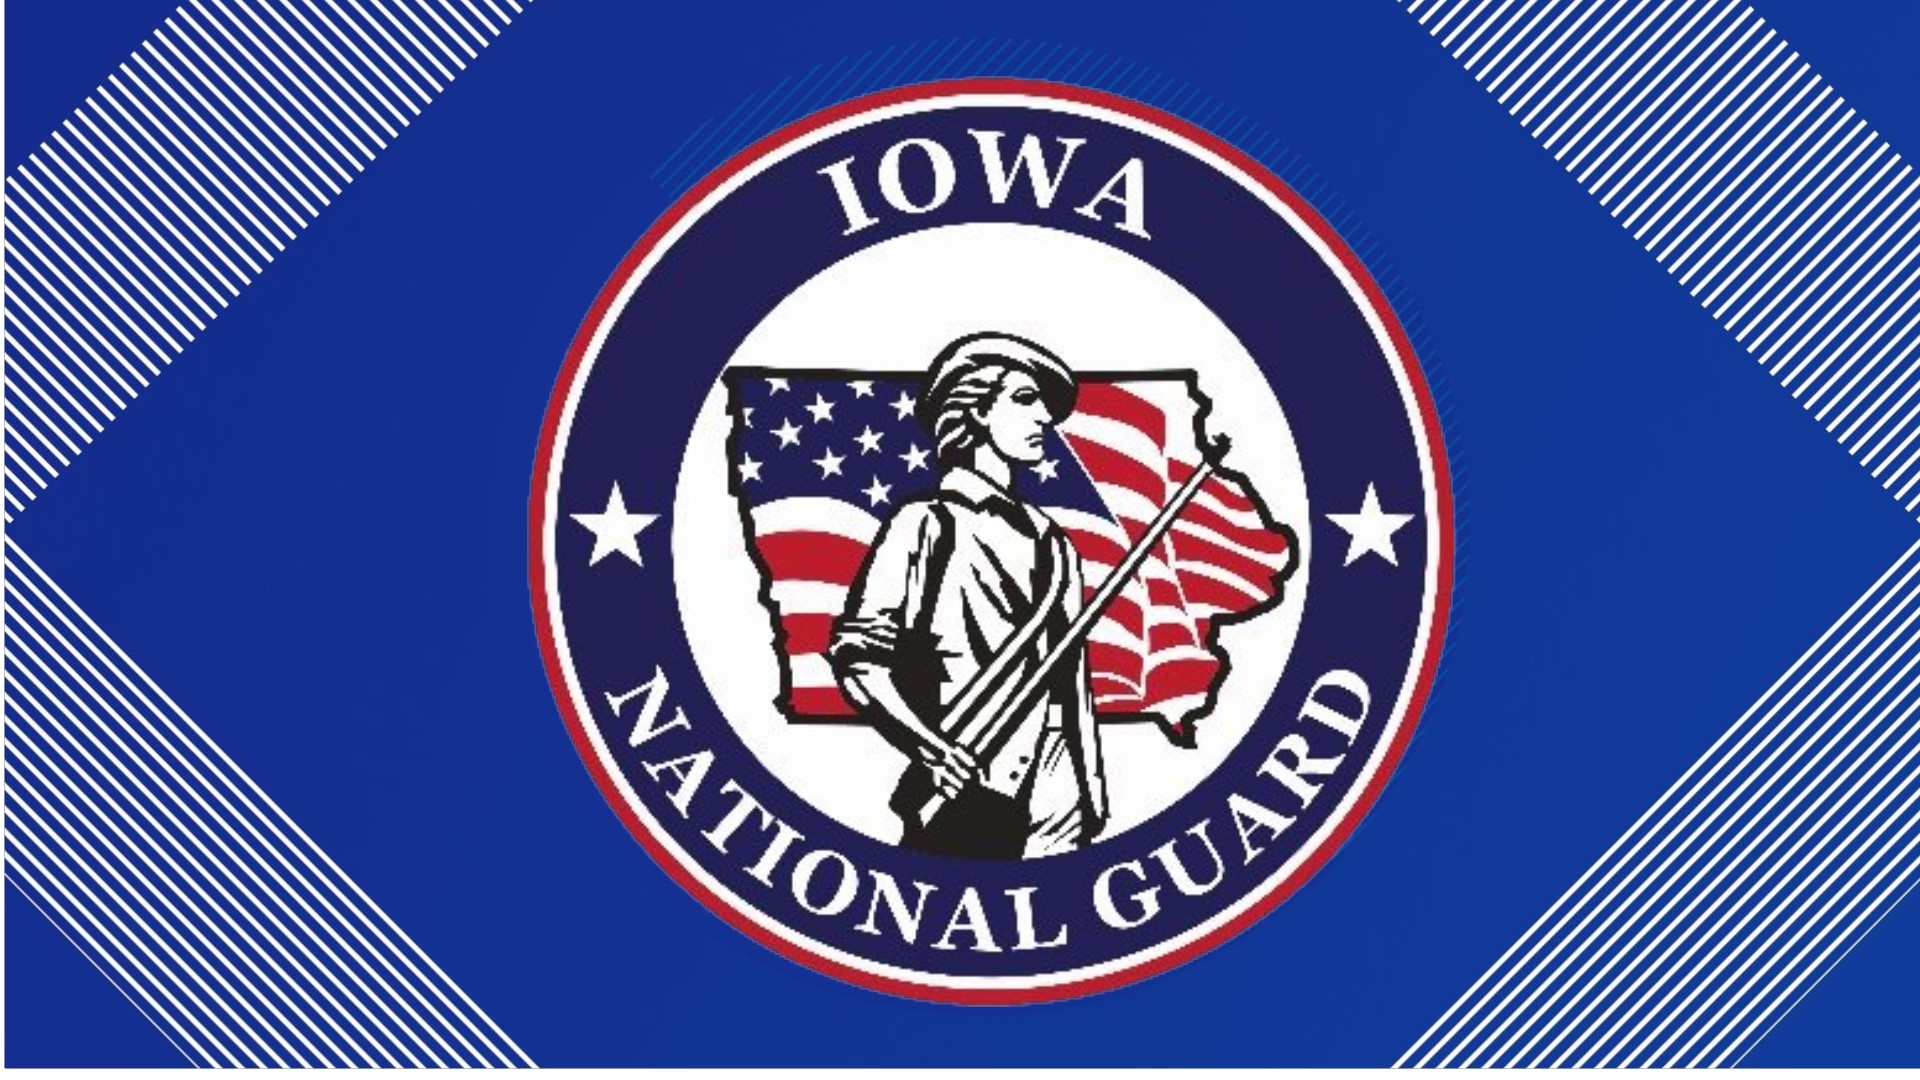 The Iowa National Guard did not say exactly where the service members will be deployed to, but did say they will be under the direction of the U.S. Northern Command.